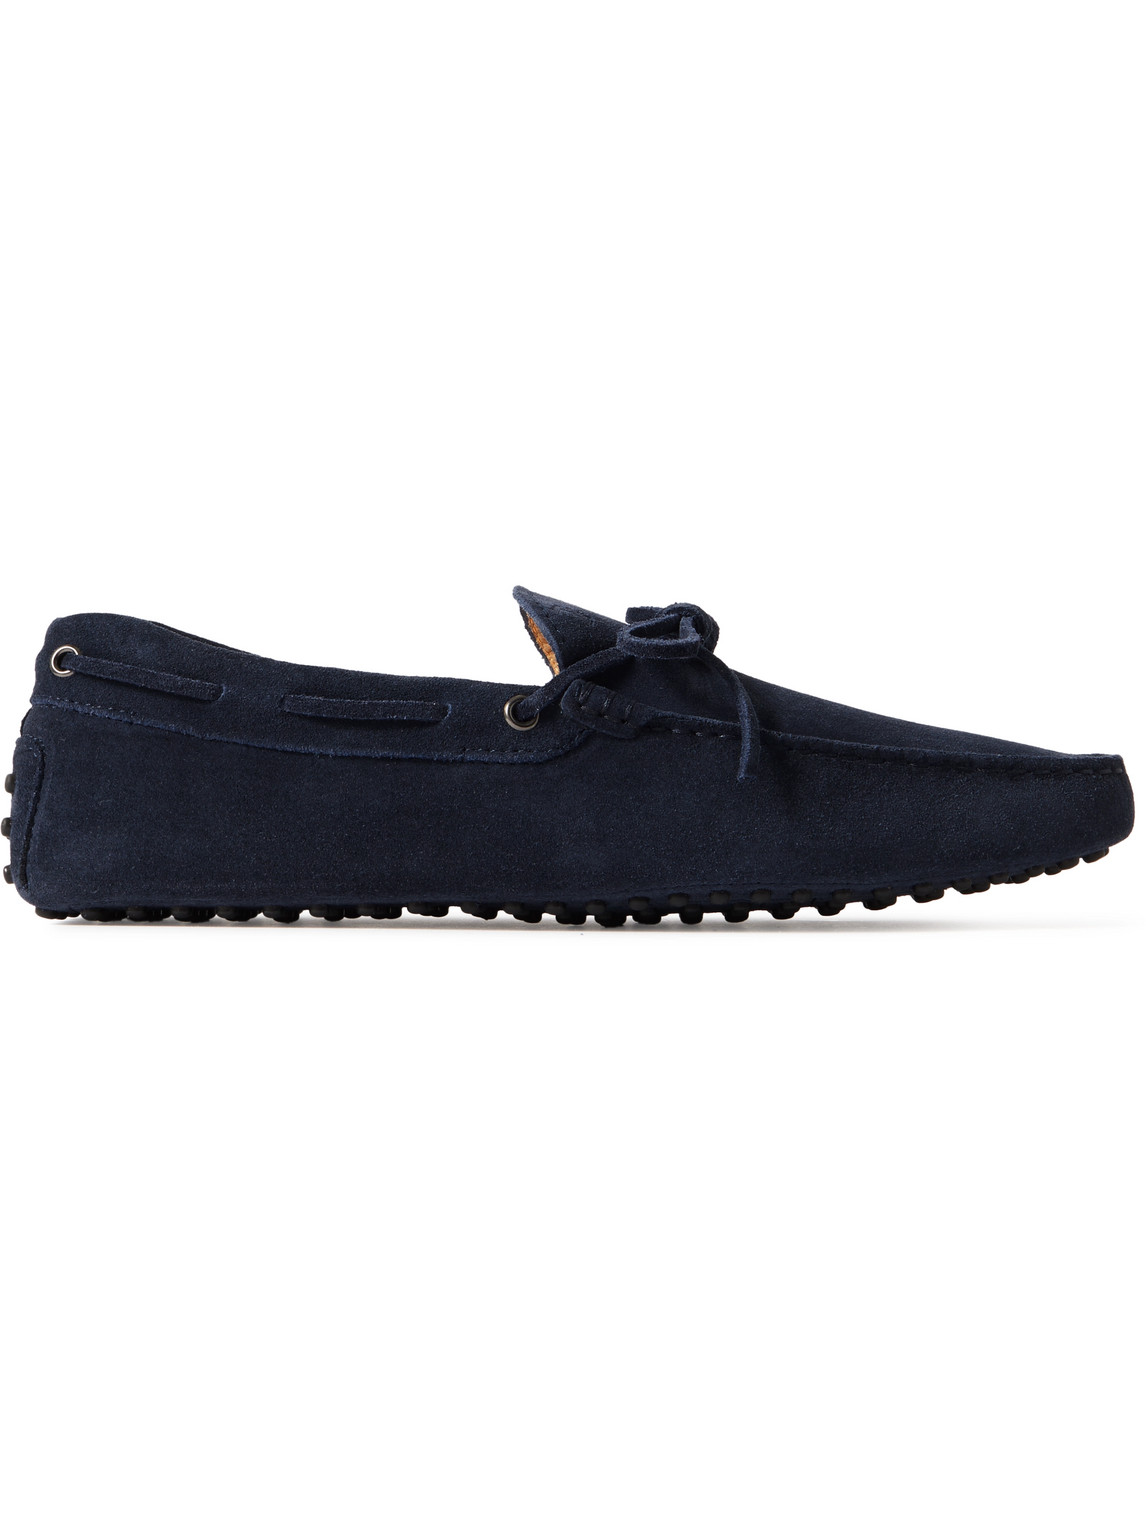 Tod's - Gommino Suede Driving Shoes - Men - Blue - UK 11.5 von Tod's